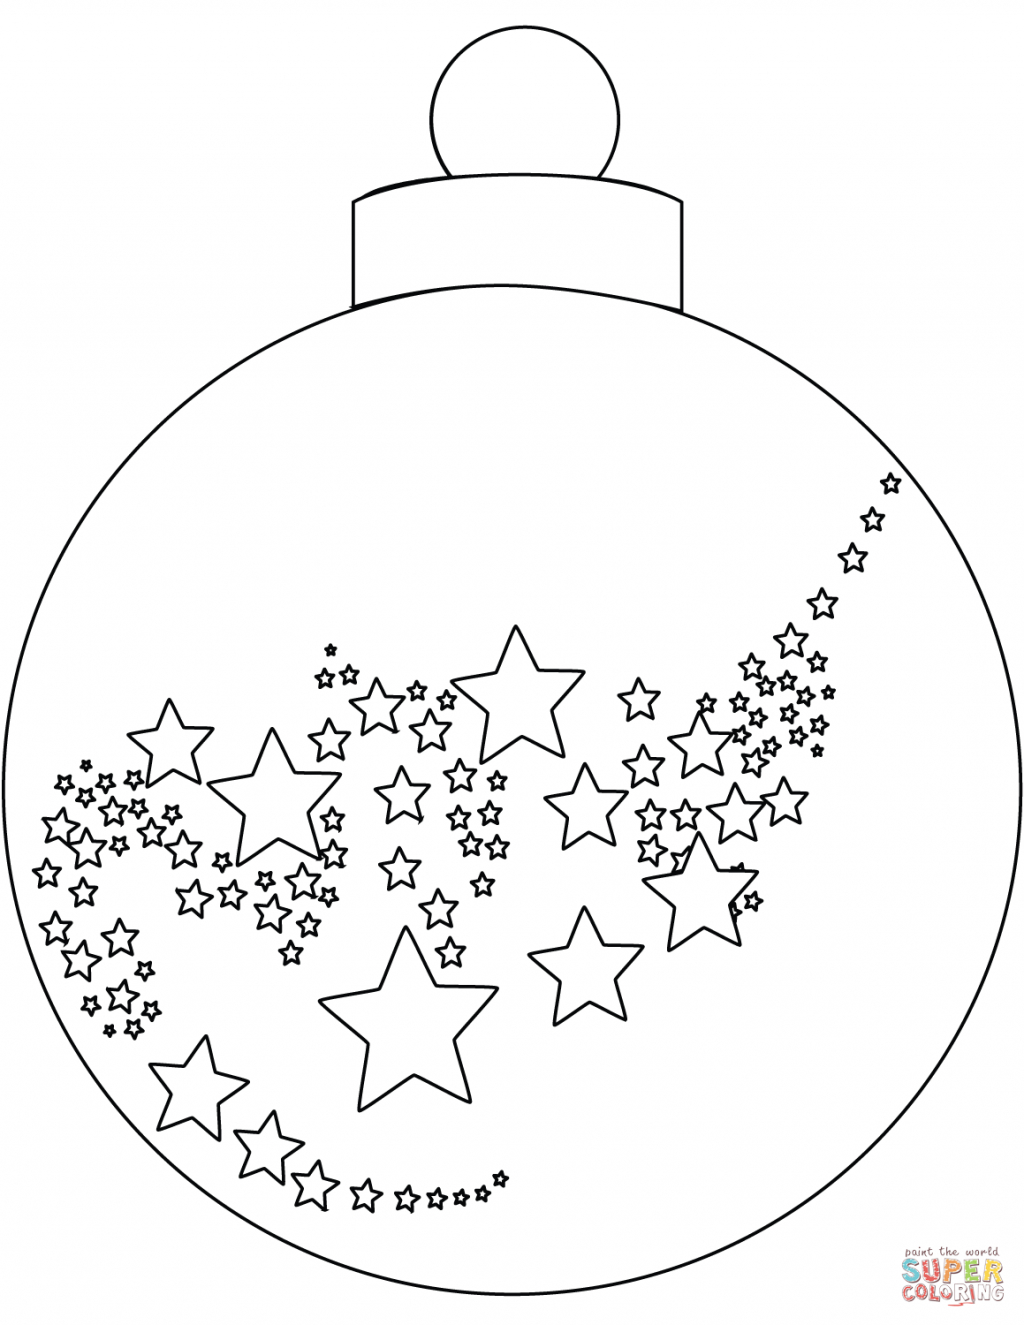 Coloring Pages ~ Ornaments Free Printable Christmas Coloring Pages - Free Printable Christmas Ornaments